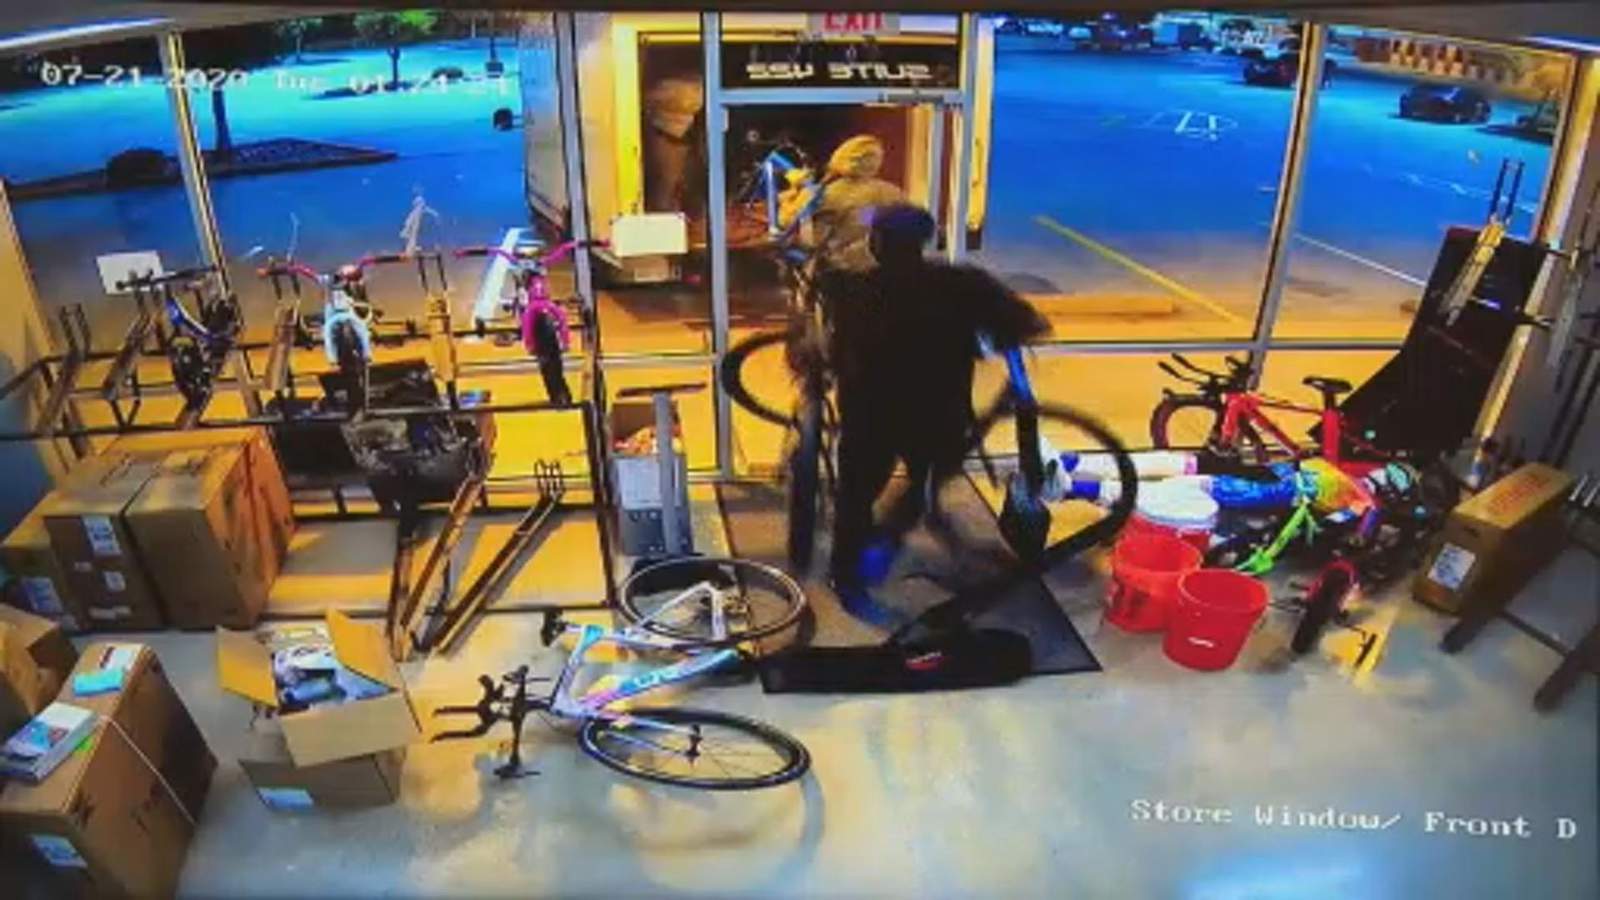 Bicycle shops see increase in thefts, burglaries -- some losing up to 40K worth in bikes